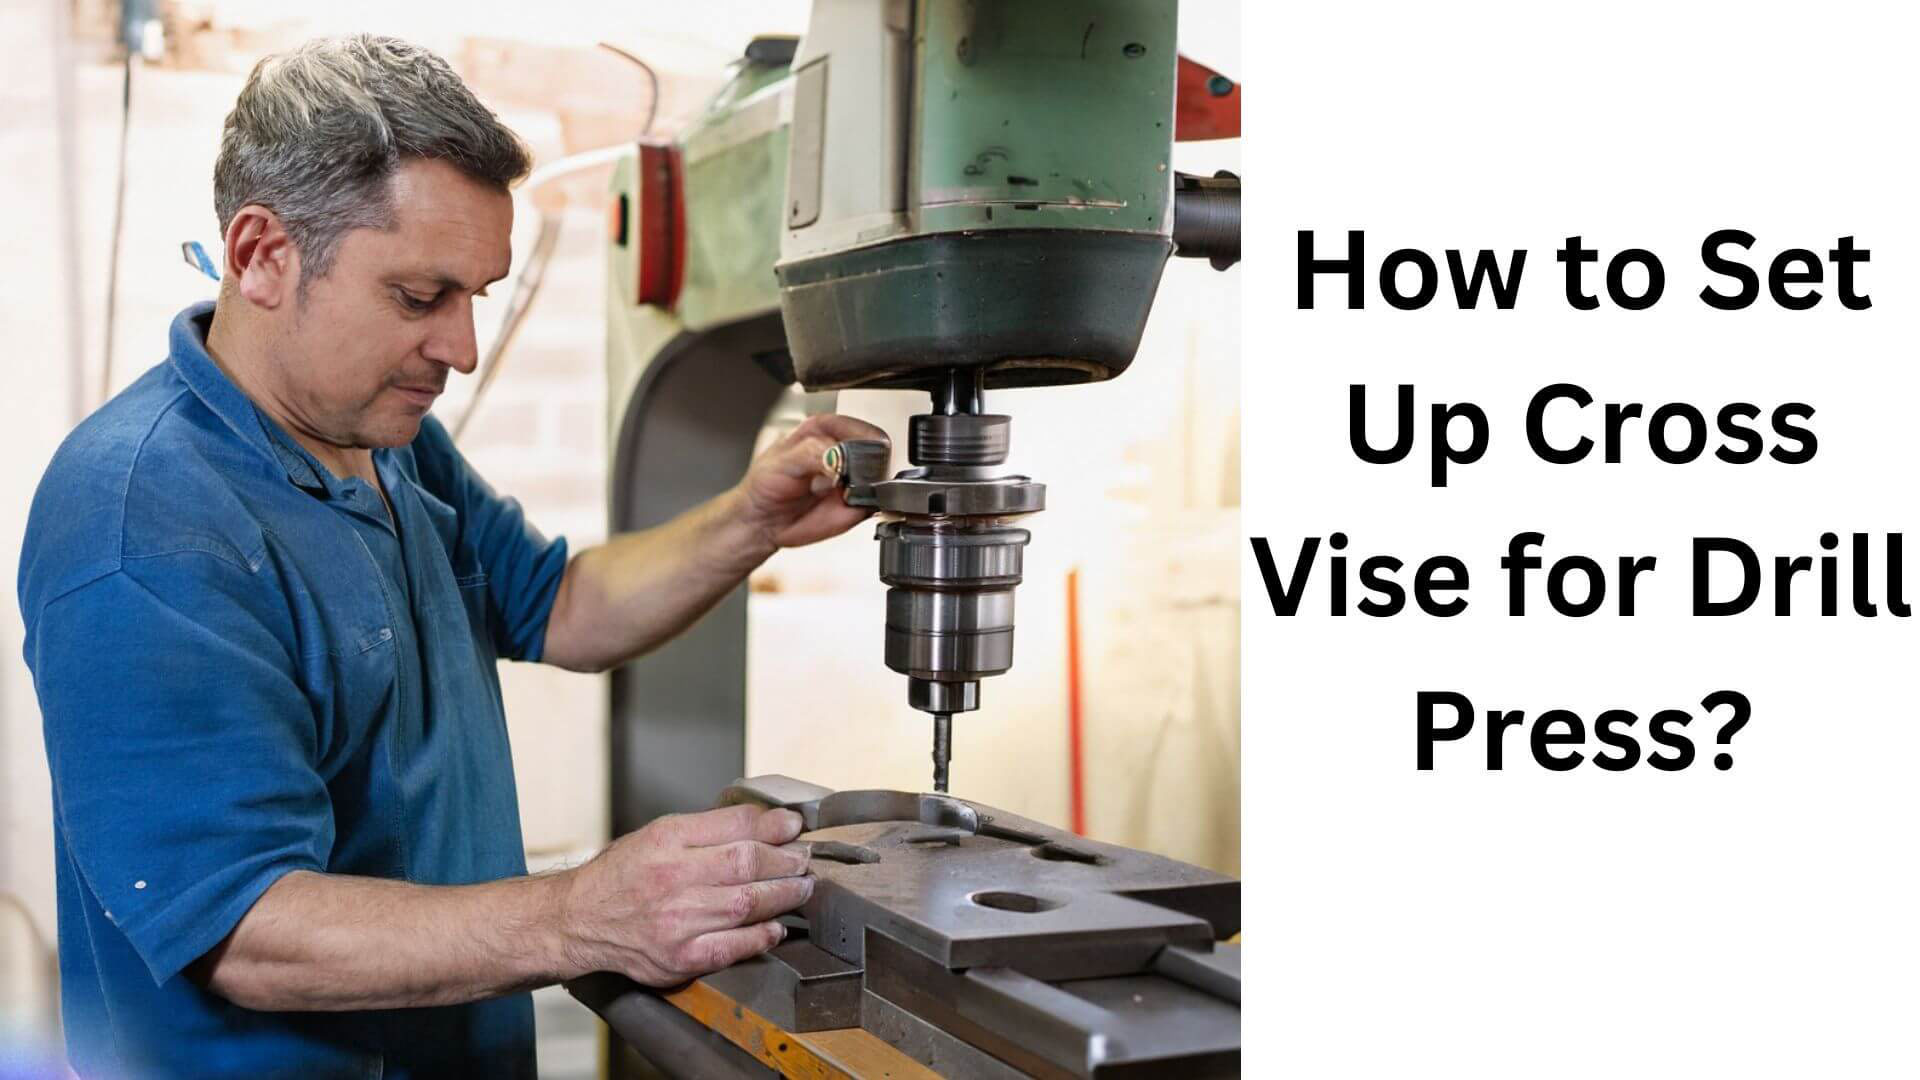 How to Set Up Cross Vise for Drill Press?